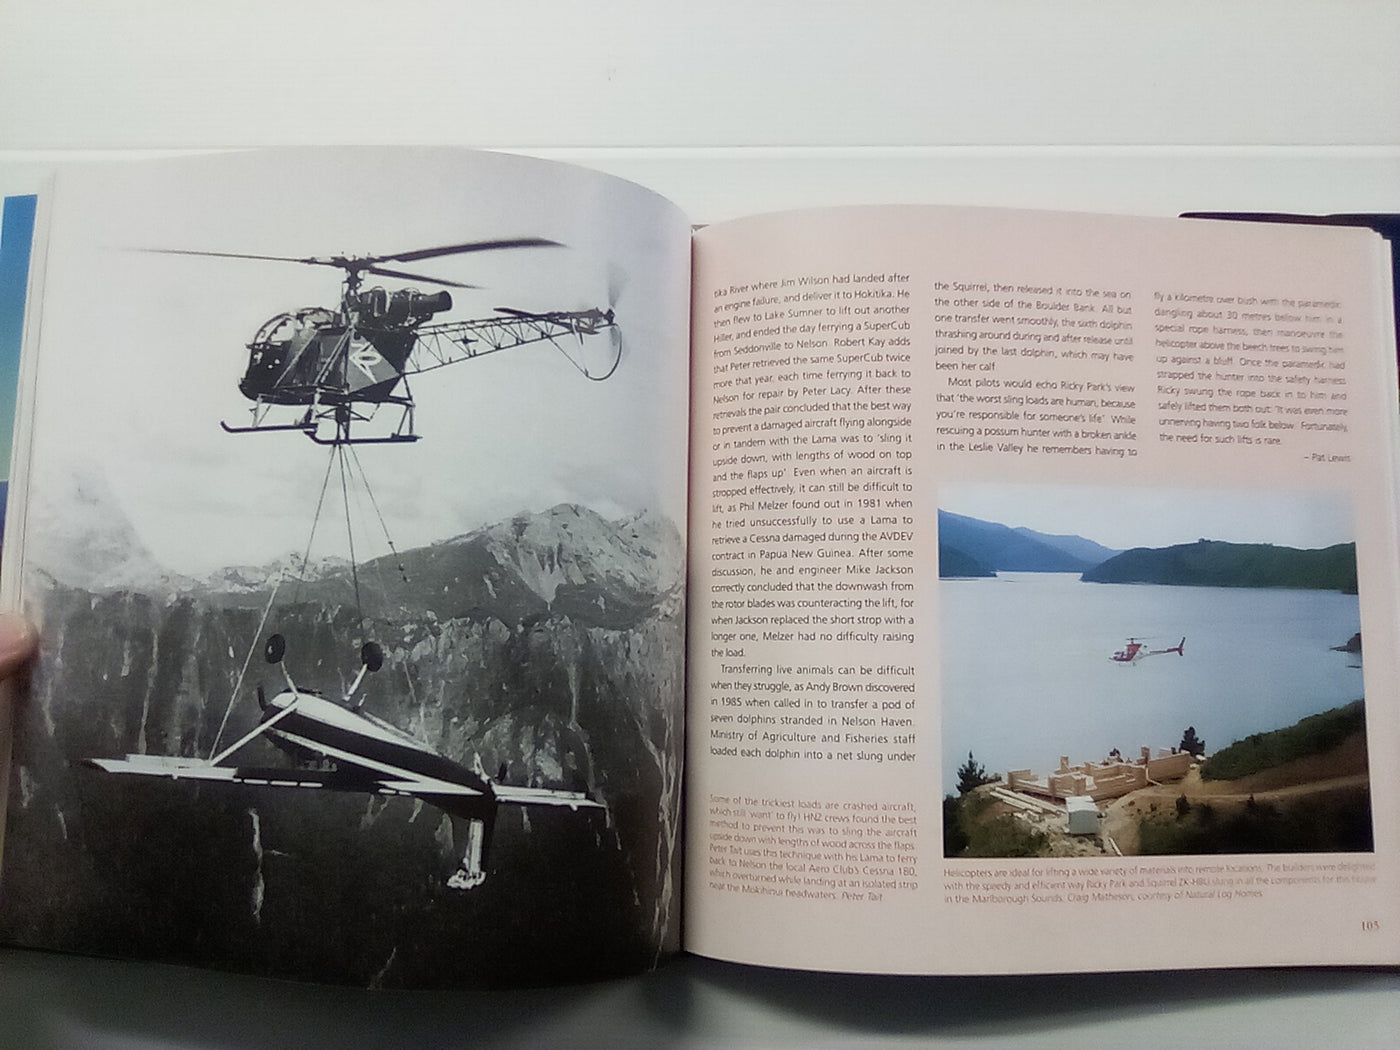 Take-Off - The Helicopters (NZ) Story by Gavin McLean